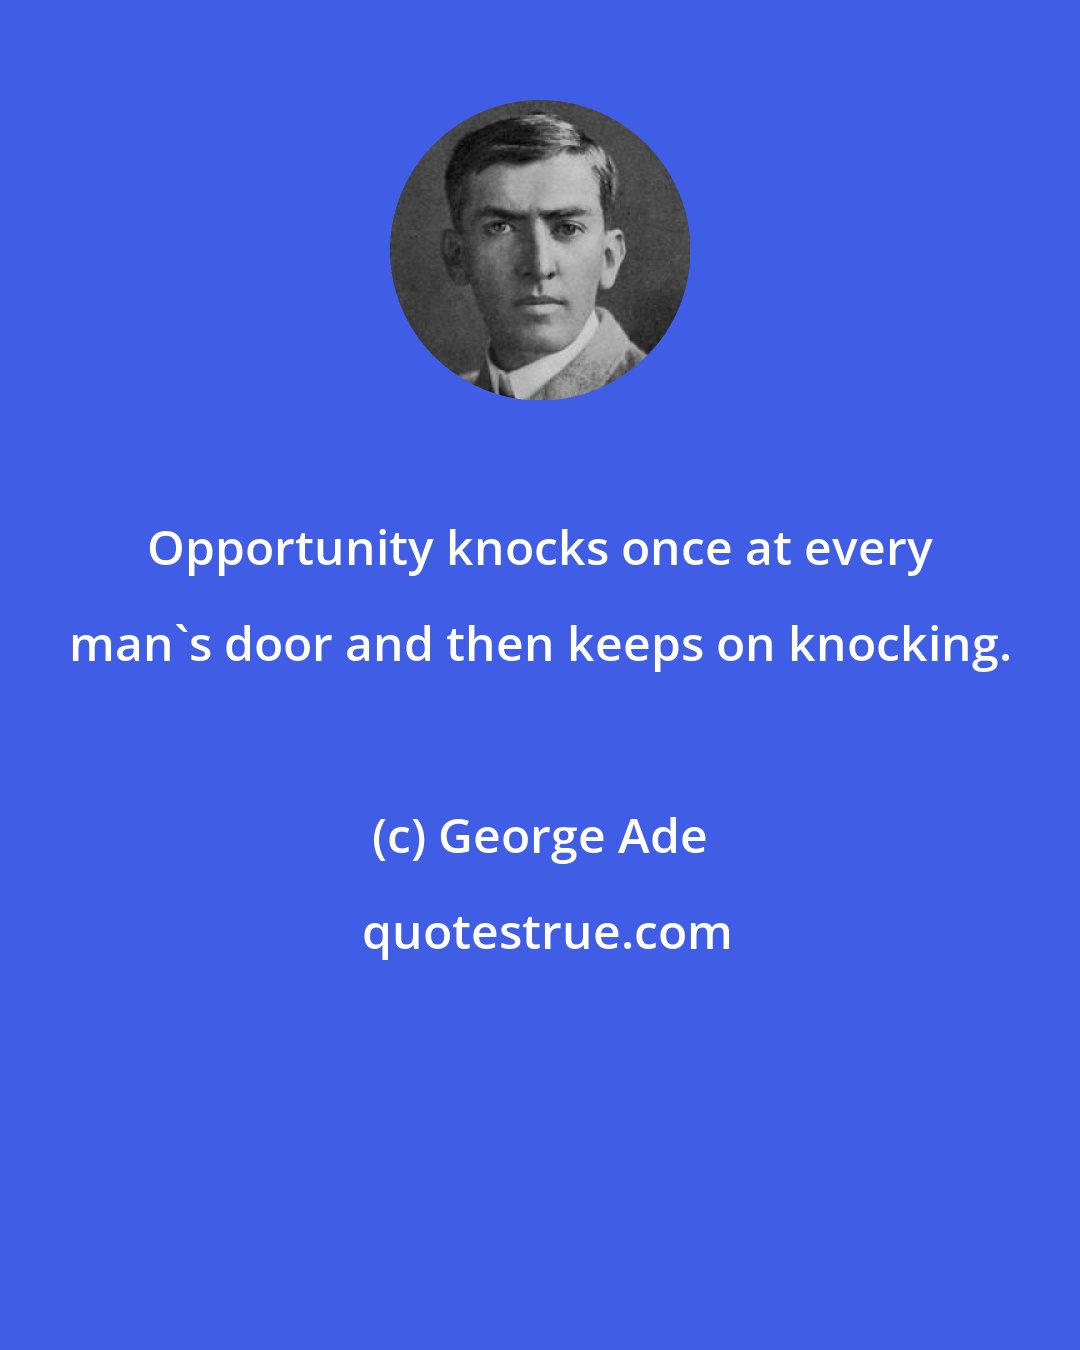 George Ade: Opportunity knocks once at every man's door and then keeps on knocking.